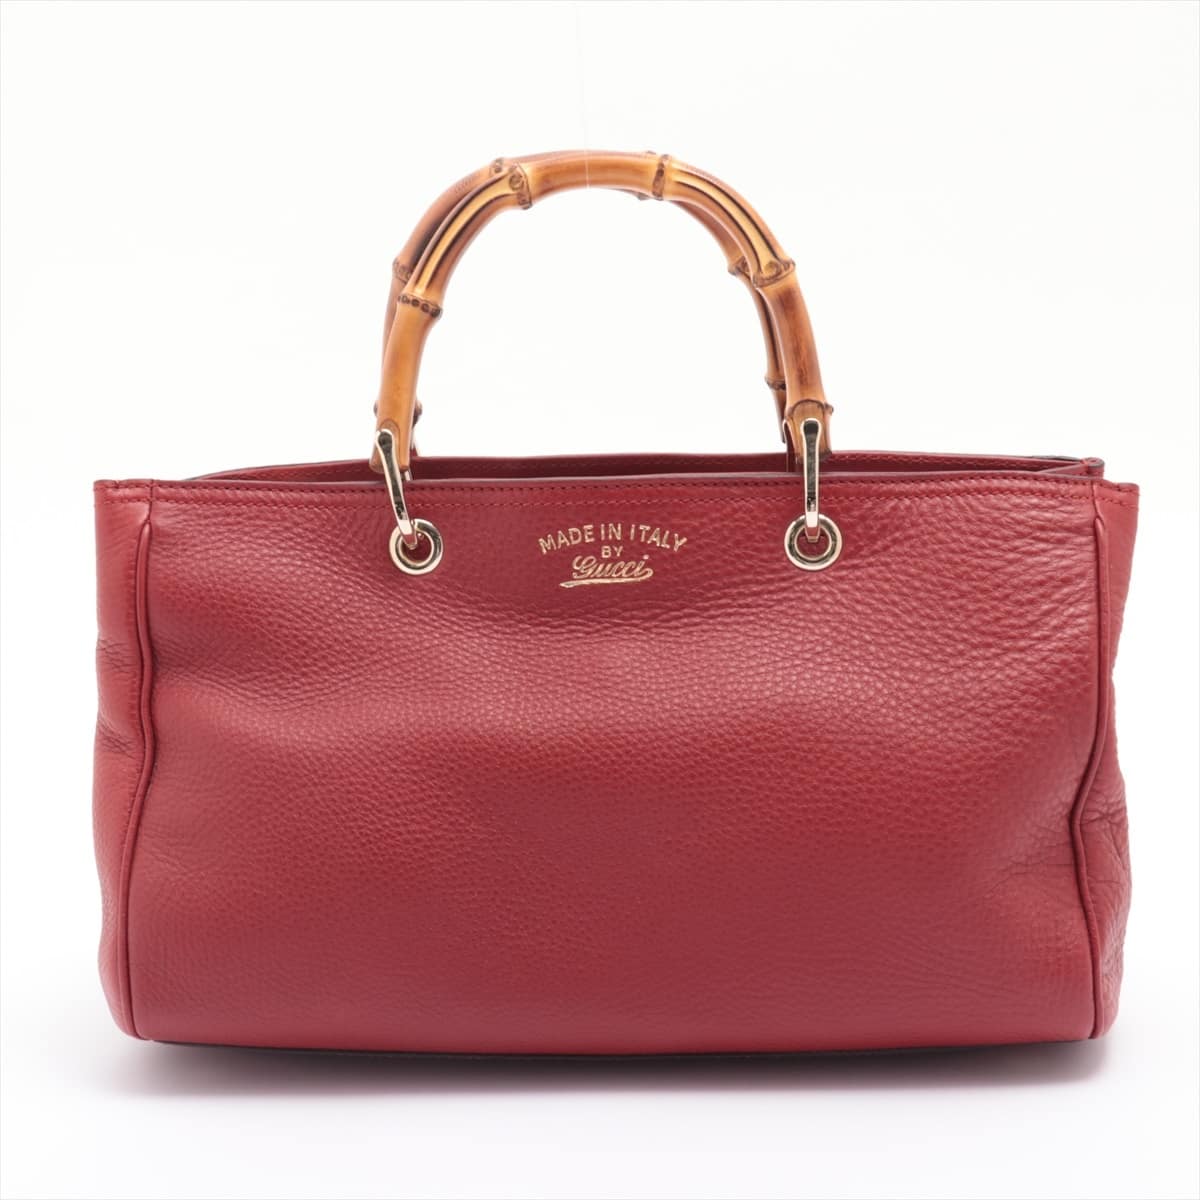 Gucci Bamboo Leather 2way shoulder bag Red 323660